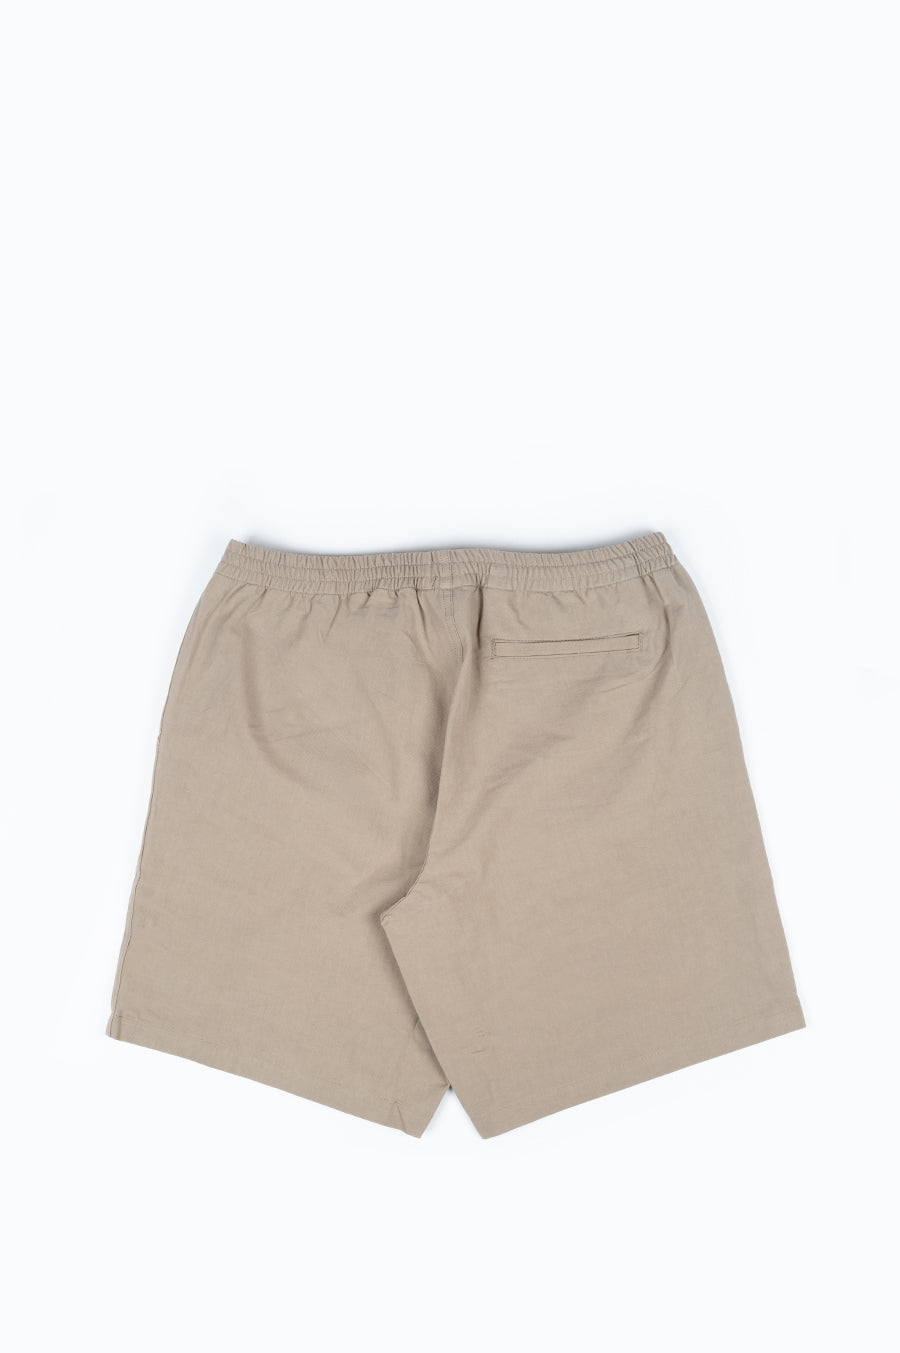 HOUSE OF PAA SHORTS TAUPE